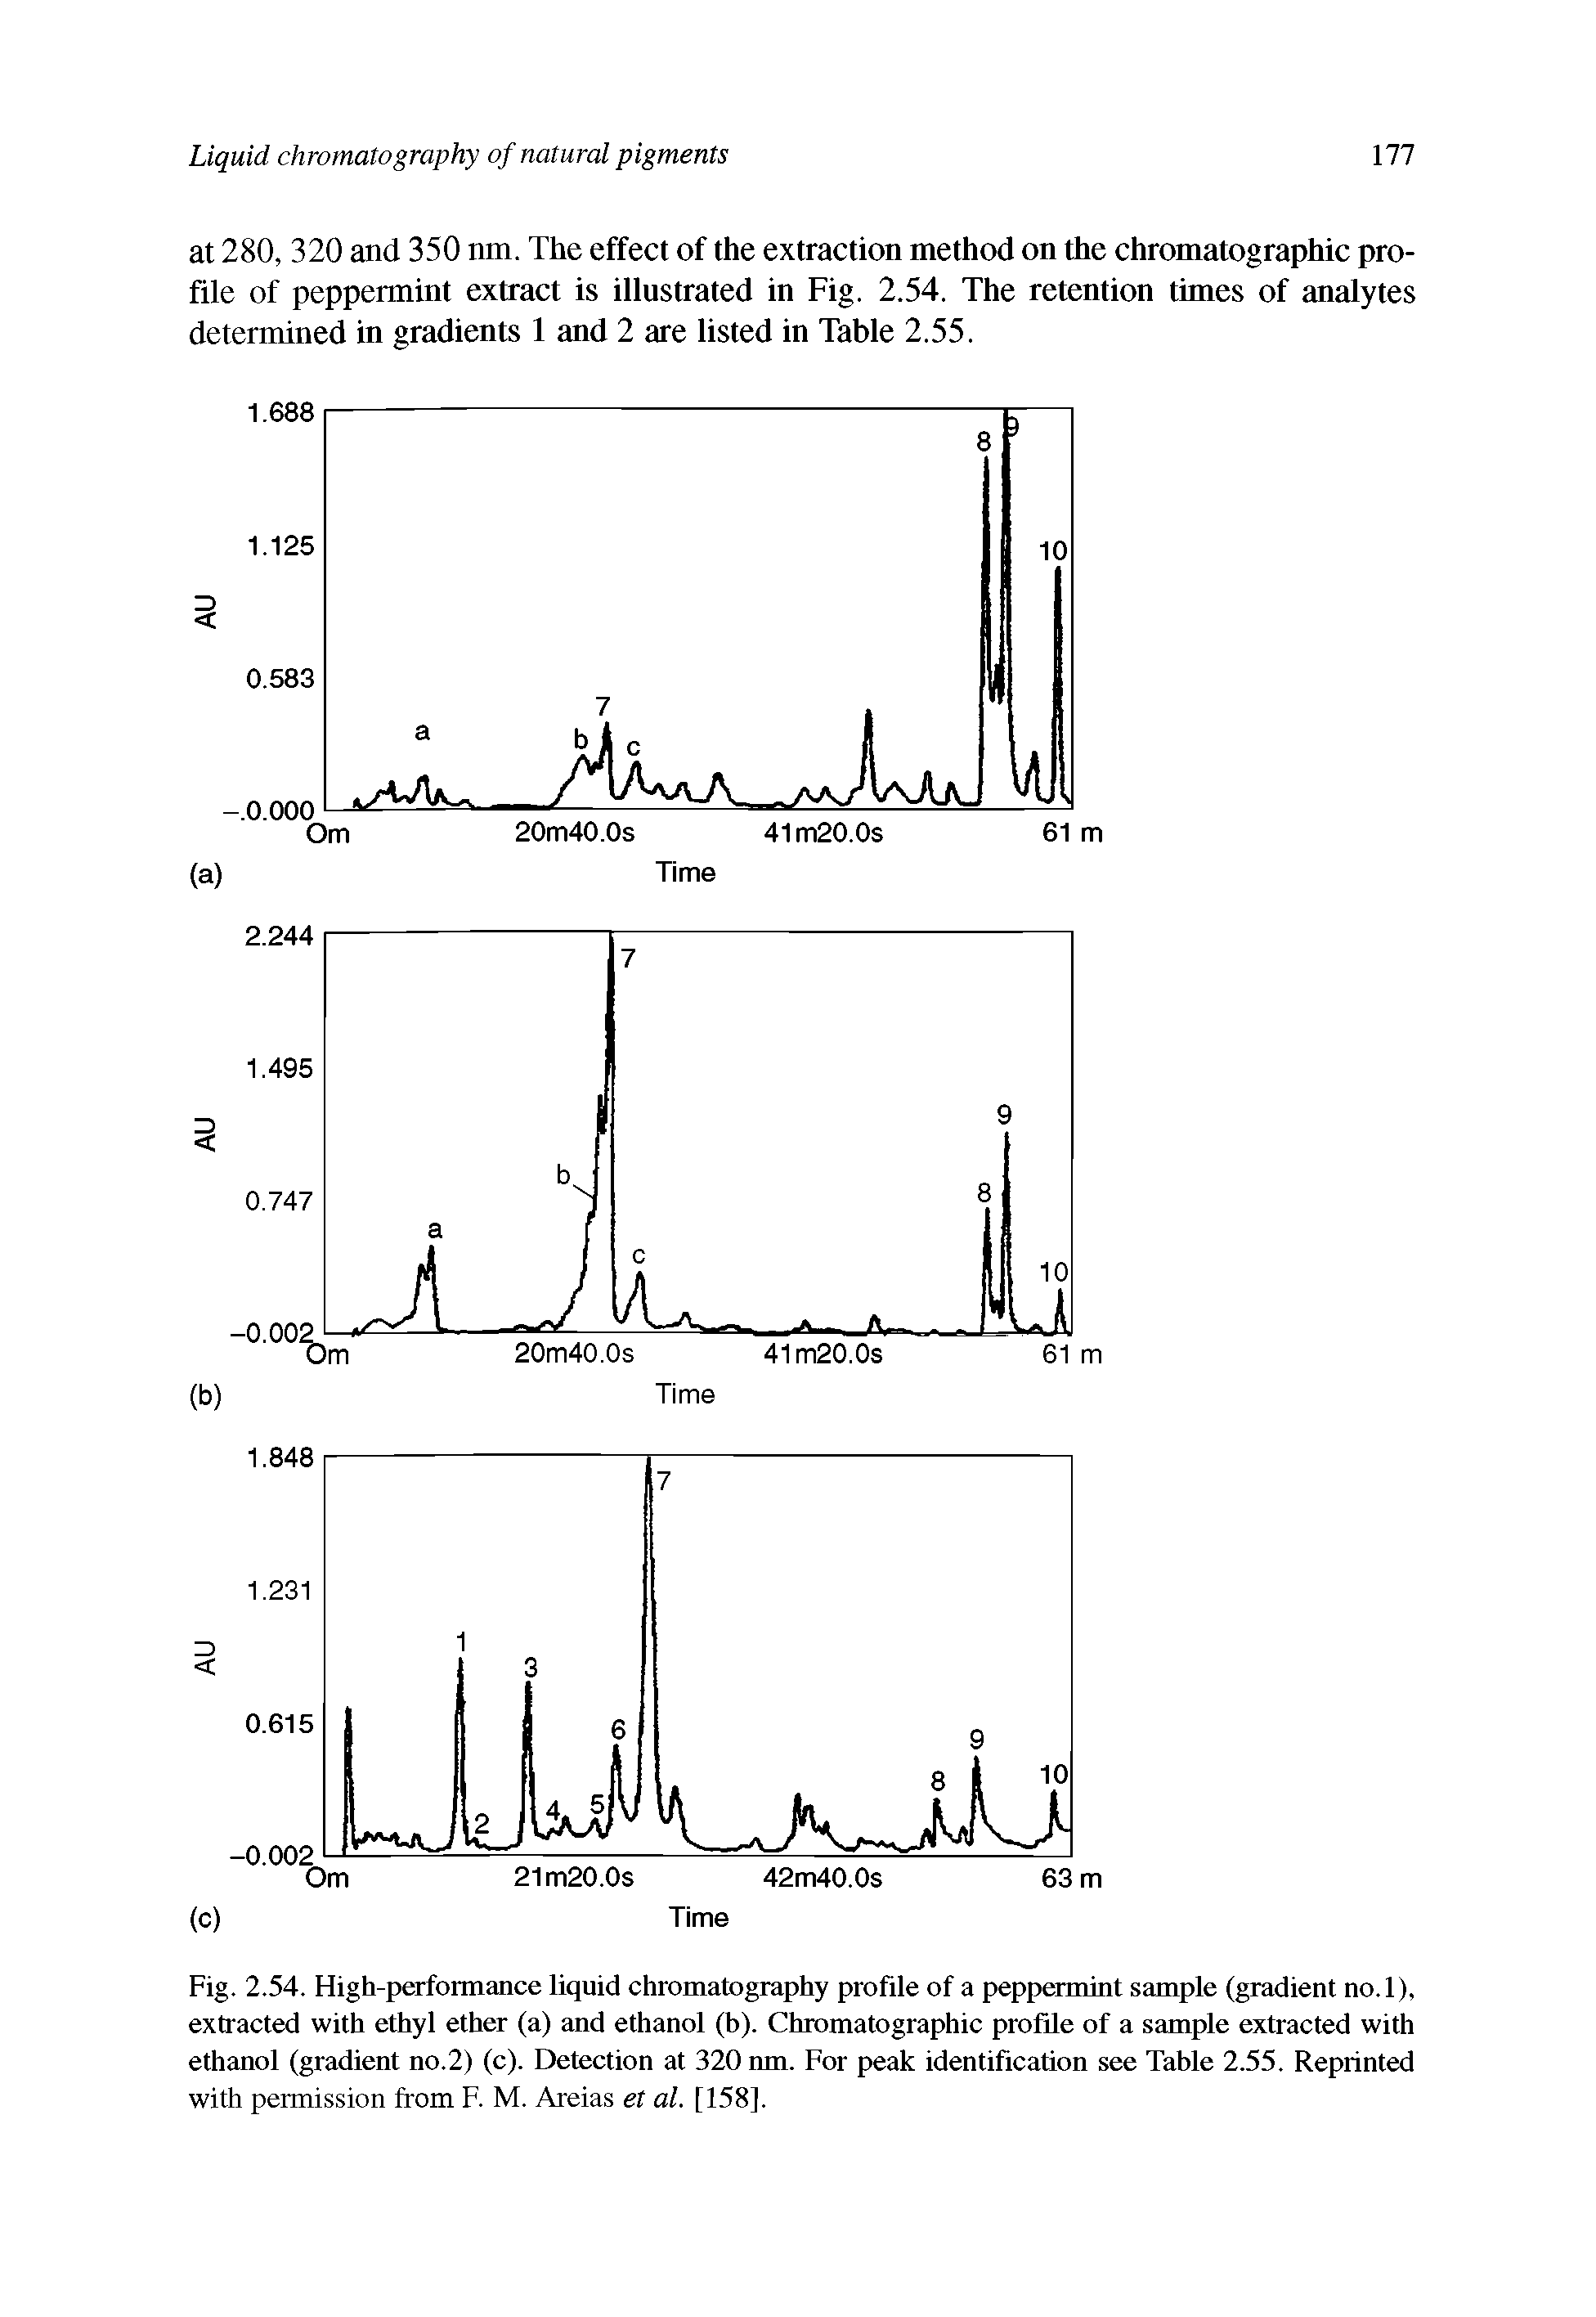 Fig. 2.54. High-performance liquid chromatography profile of a peppermint sample (gradient no.l), extracted with ethyl ether (a) and ethanol (b). Chromatographic profile of a sample extracted with ethanol (gradient no.2) (c). Detection at 320 nm. For peak identification see Table 2.55. Reprinted...